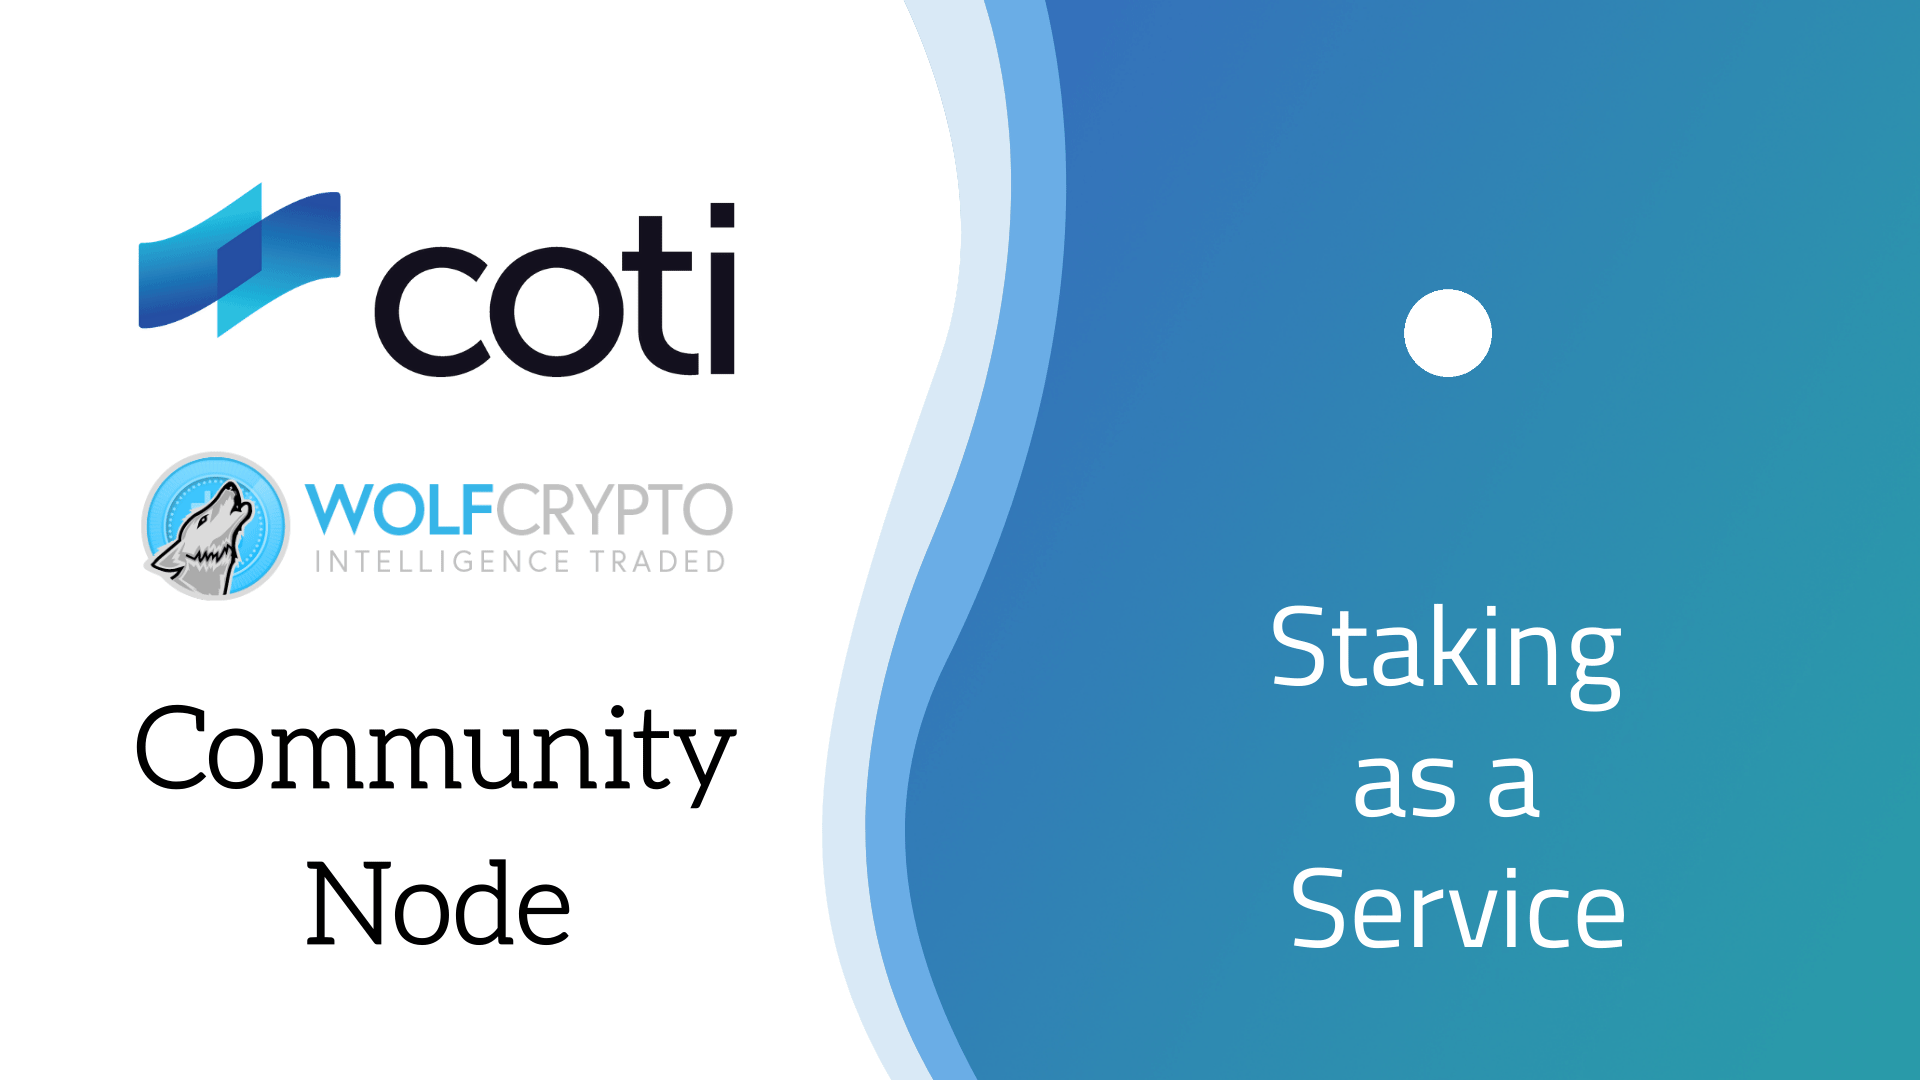 As recently announced, COTI is deploying its first ...